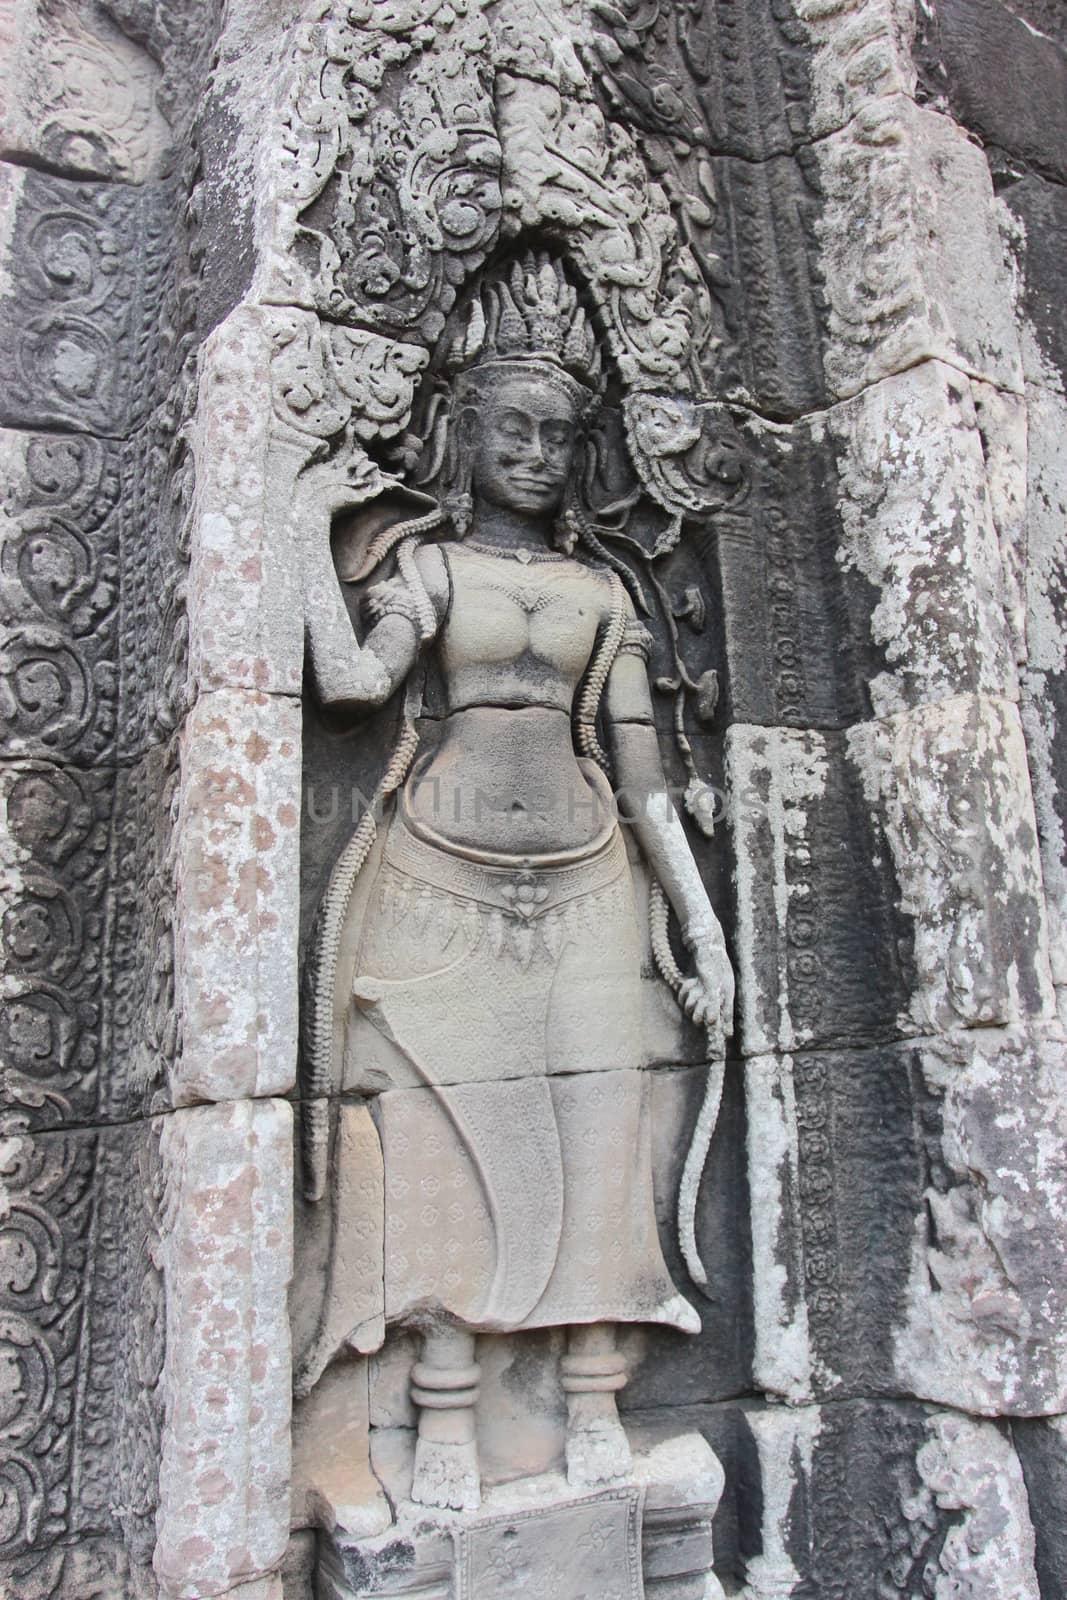 A beautiful ancient relief on the wall of a Cambodian Buddhist temple from Angkor complex, near the antique city of Siem Reap.